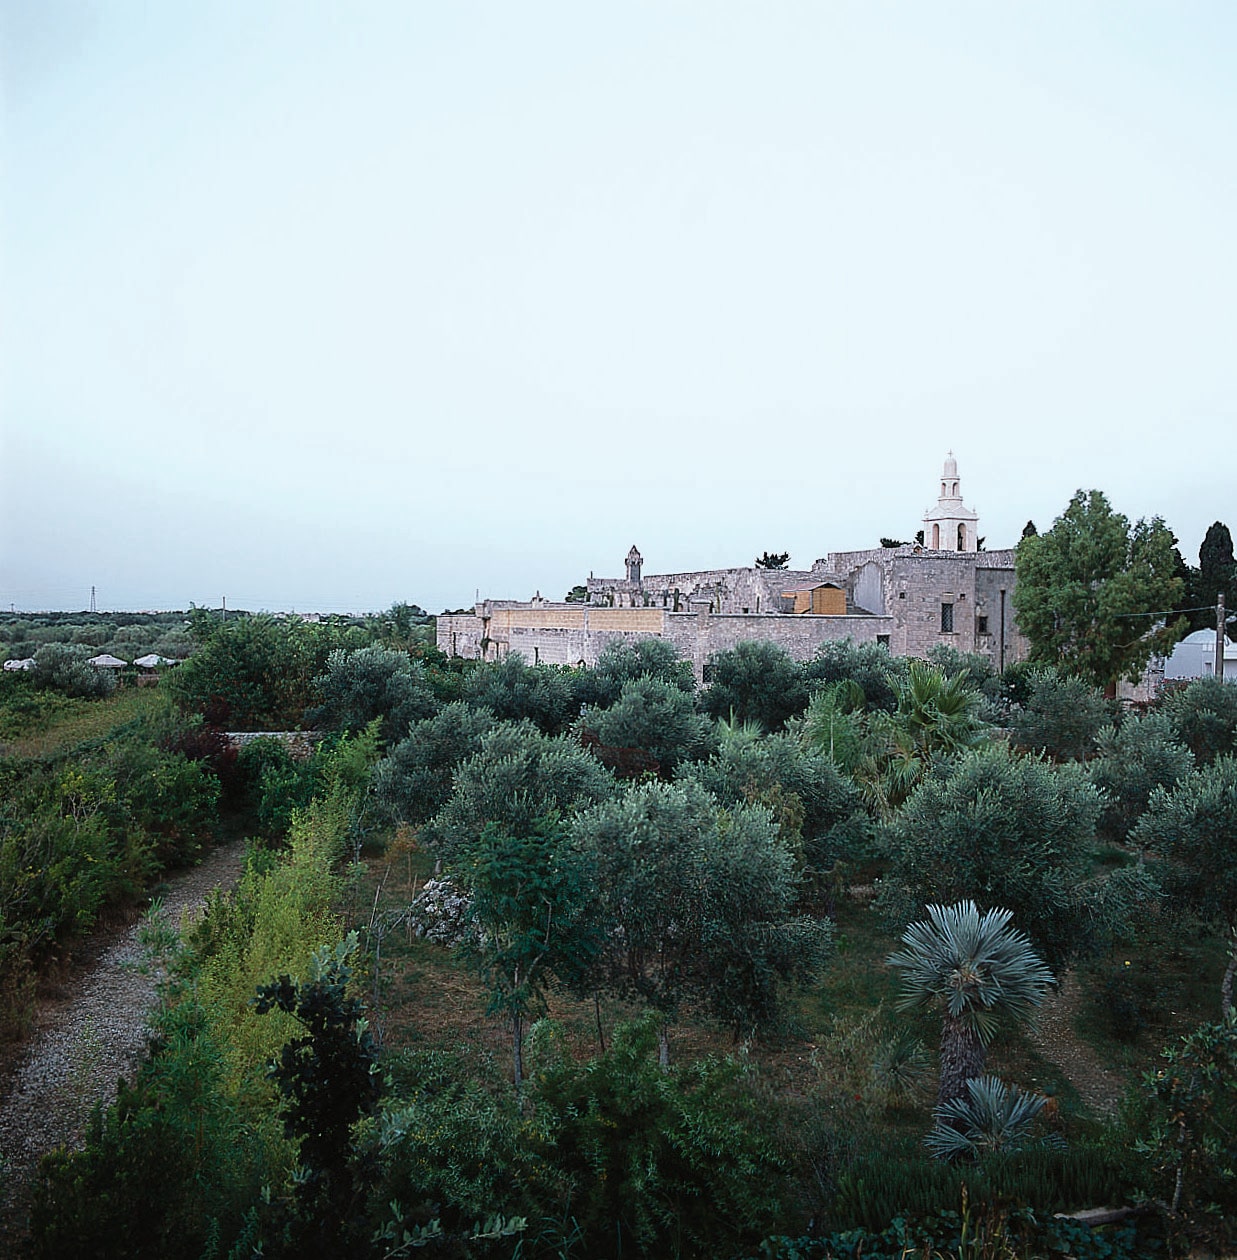 At the end of a rosemaryhedged pathway is a view of the convento over the tops of olive trees